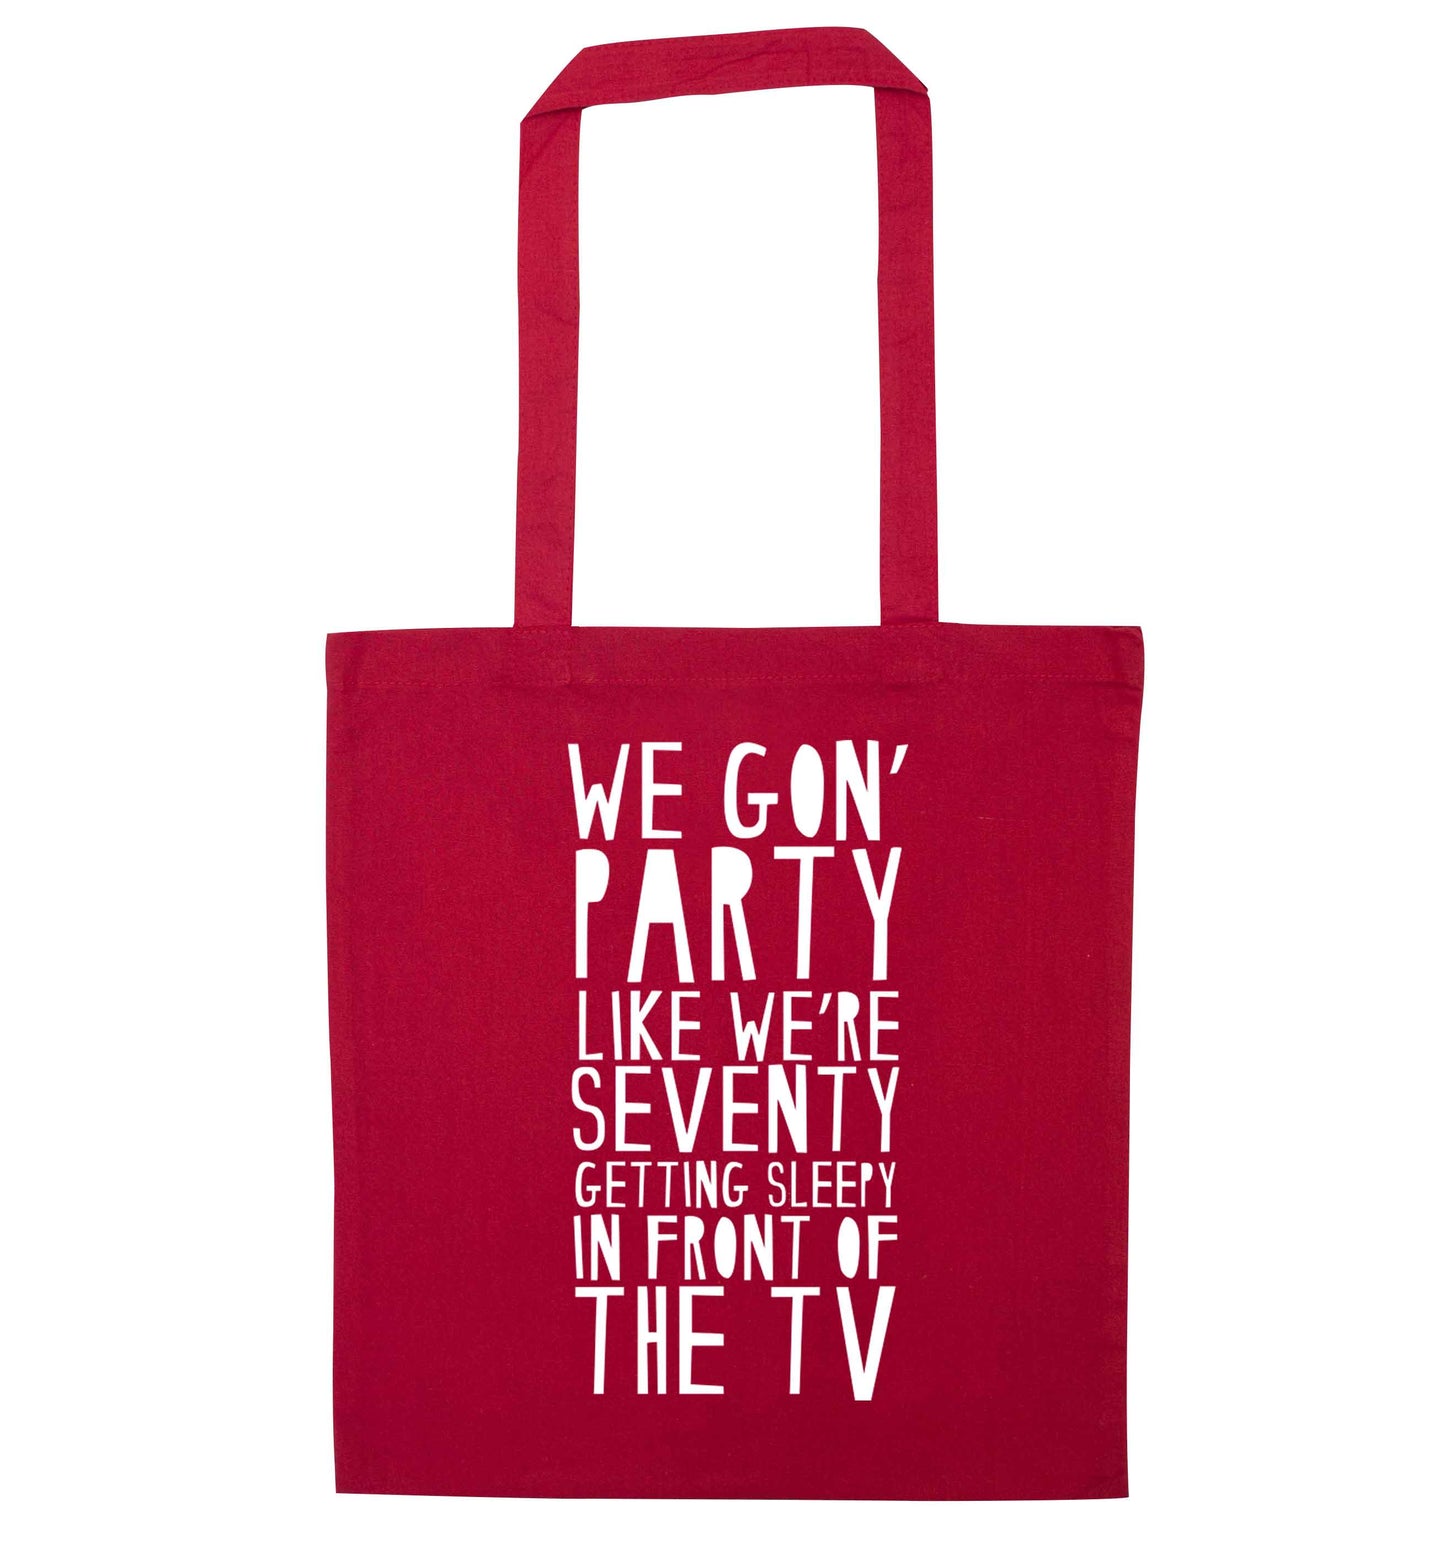 We gon' party like we're seventy getting sleepy in front of the TV red tote bag